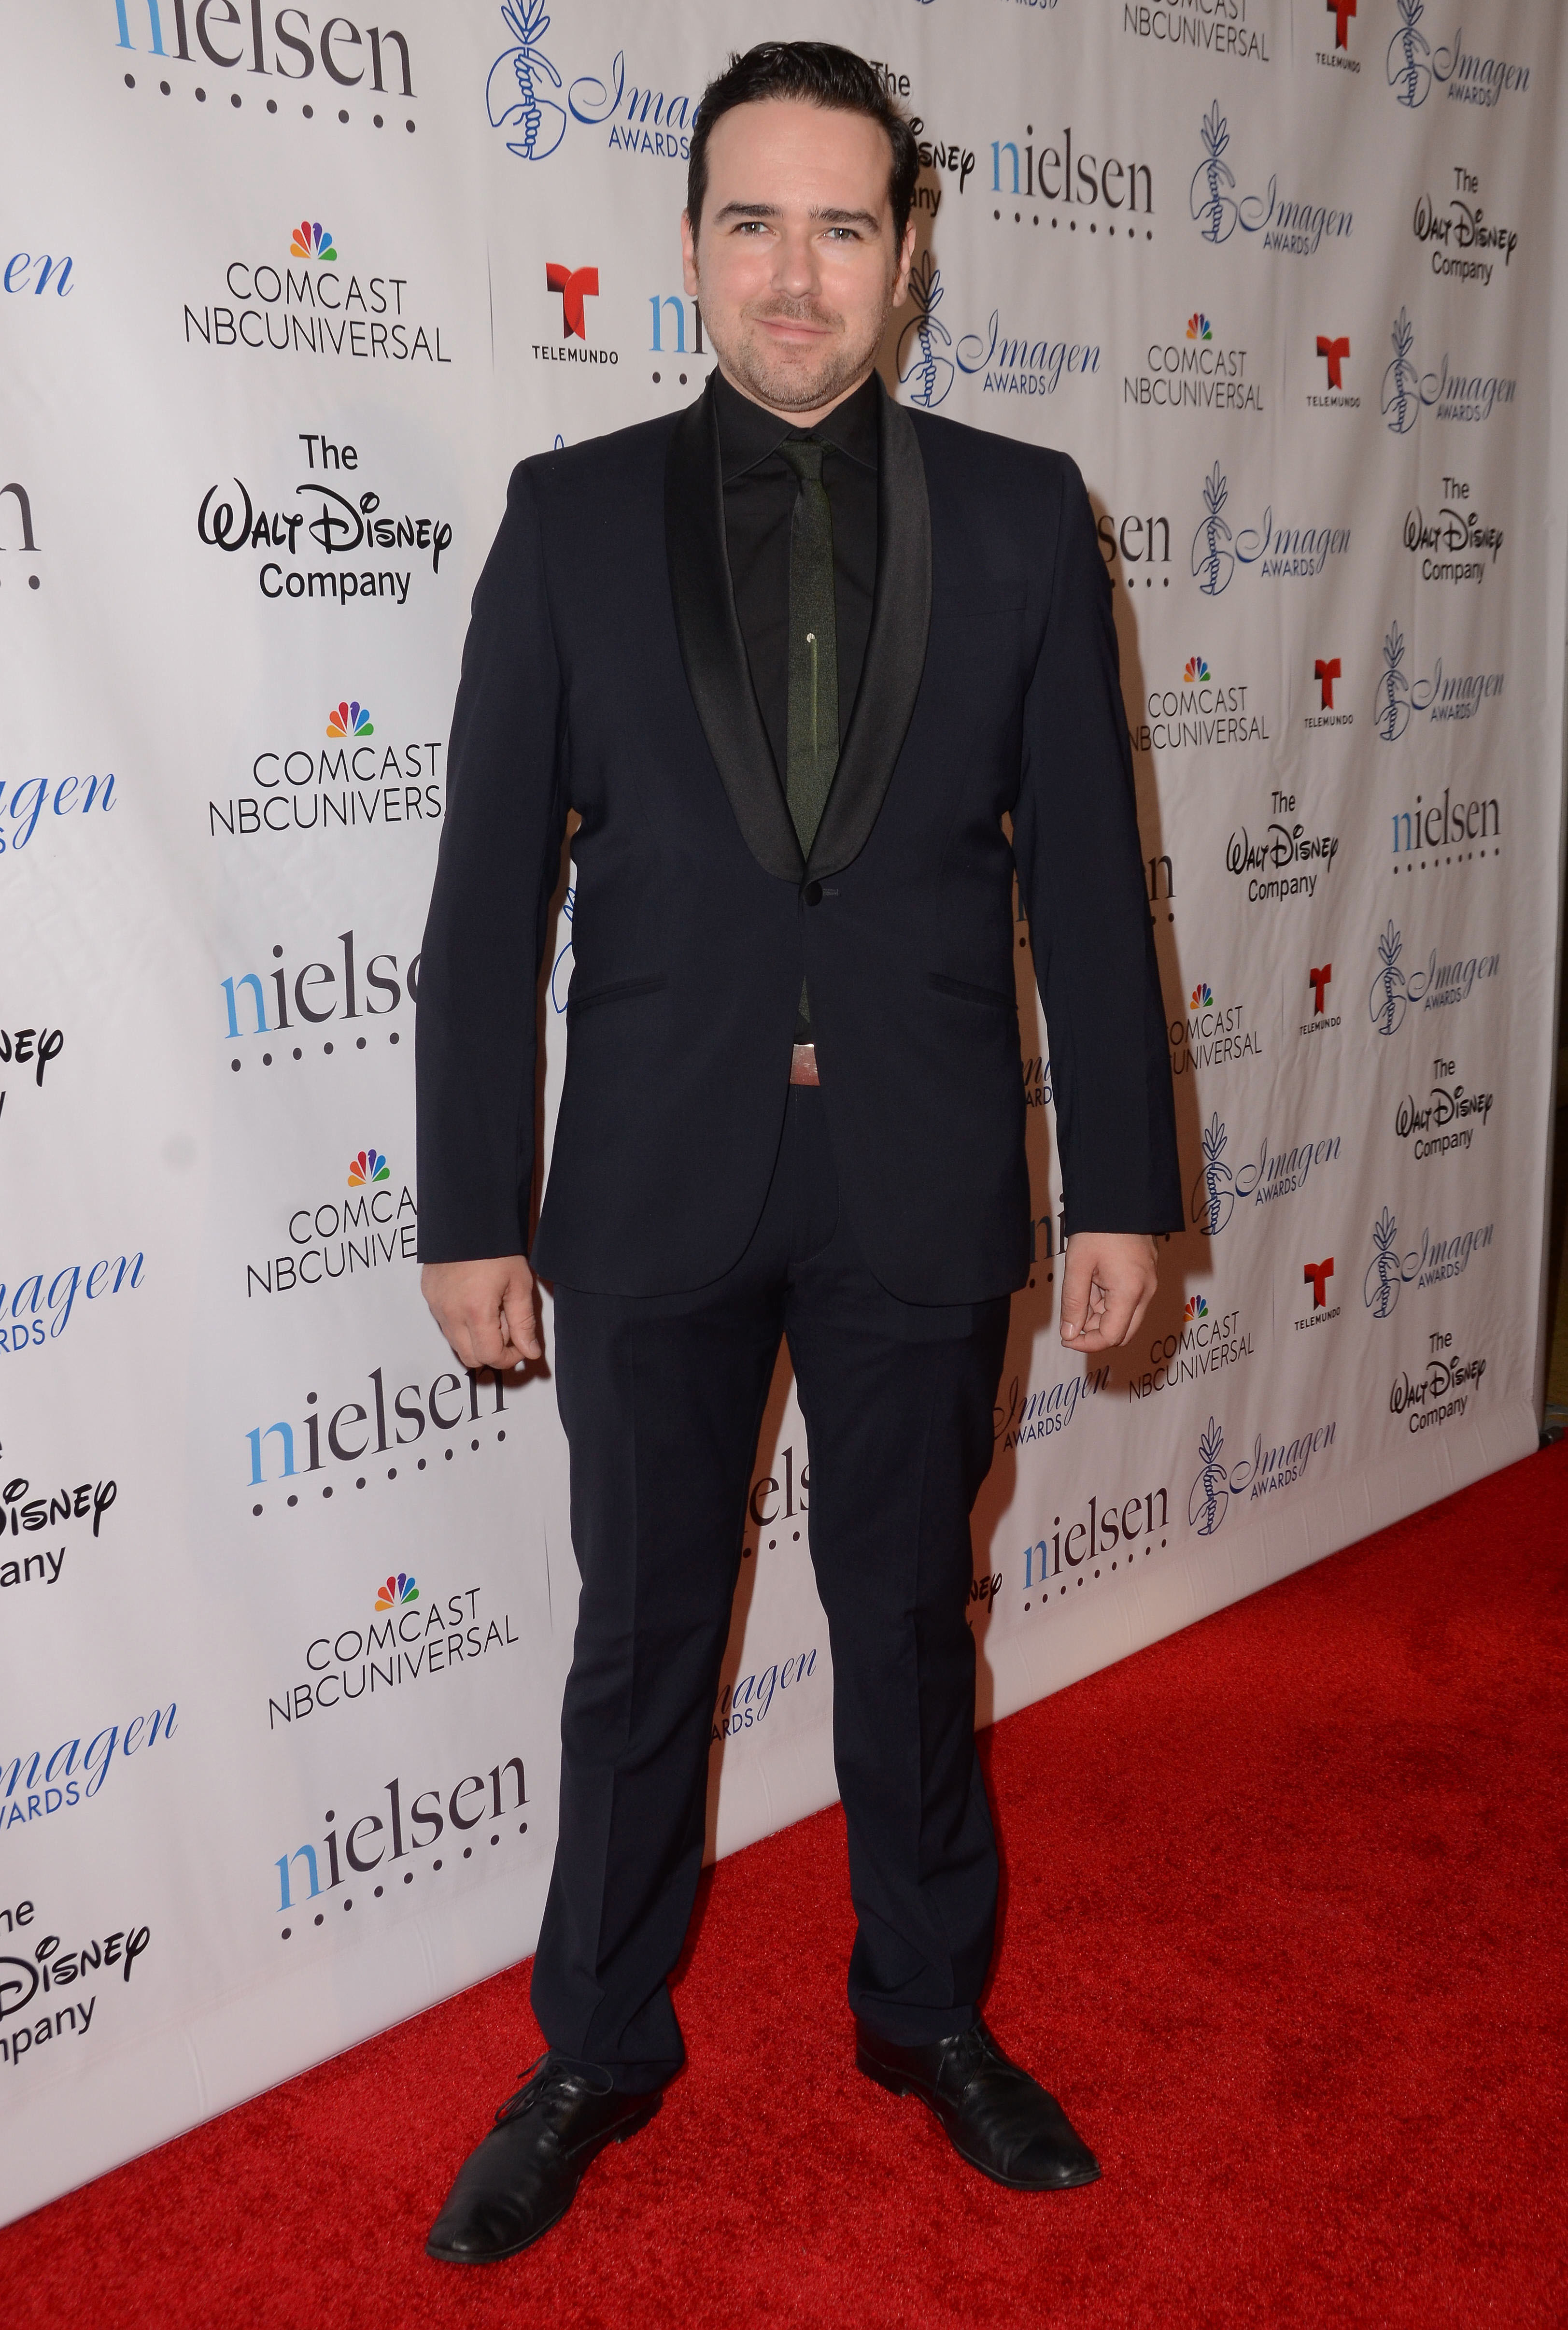 21 August 2015 - Los Angeles, California - Carlo Garcia. Arrivals for the 30th Annual Imagen Awards held at The Dorothy Chandler Pavilion. Photo Credit: Birdie Thompson/AdMedia